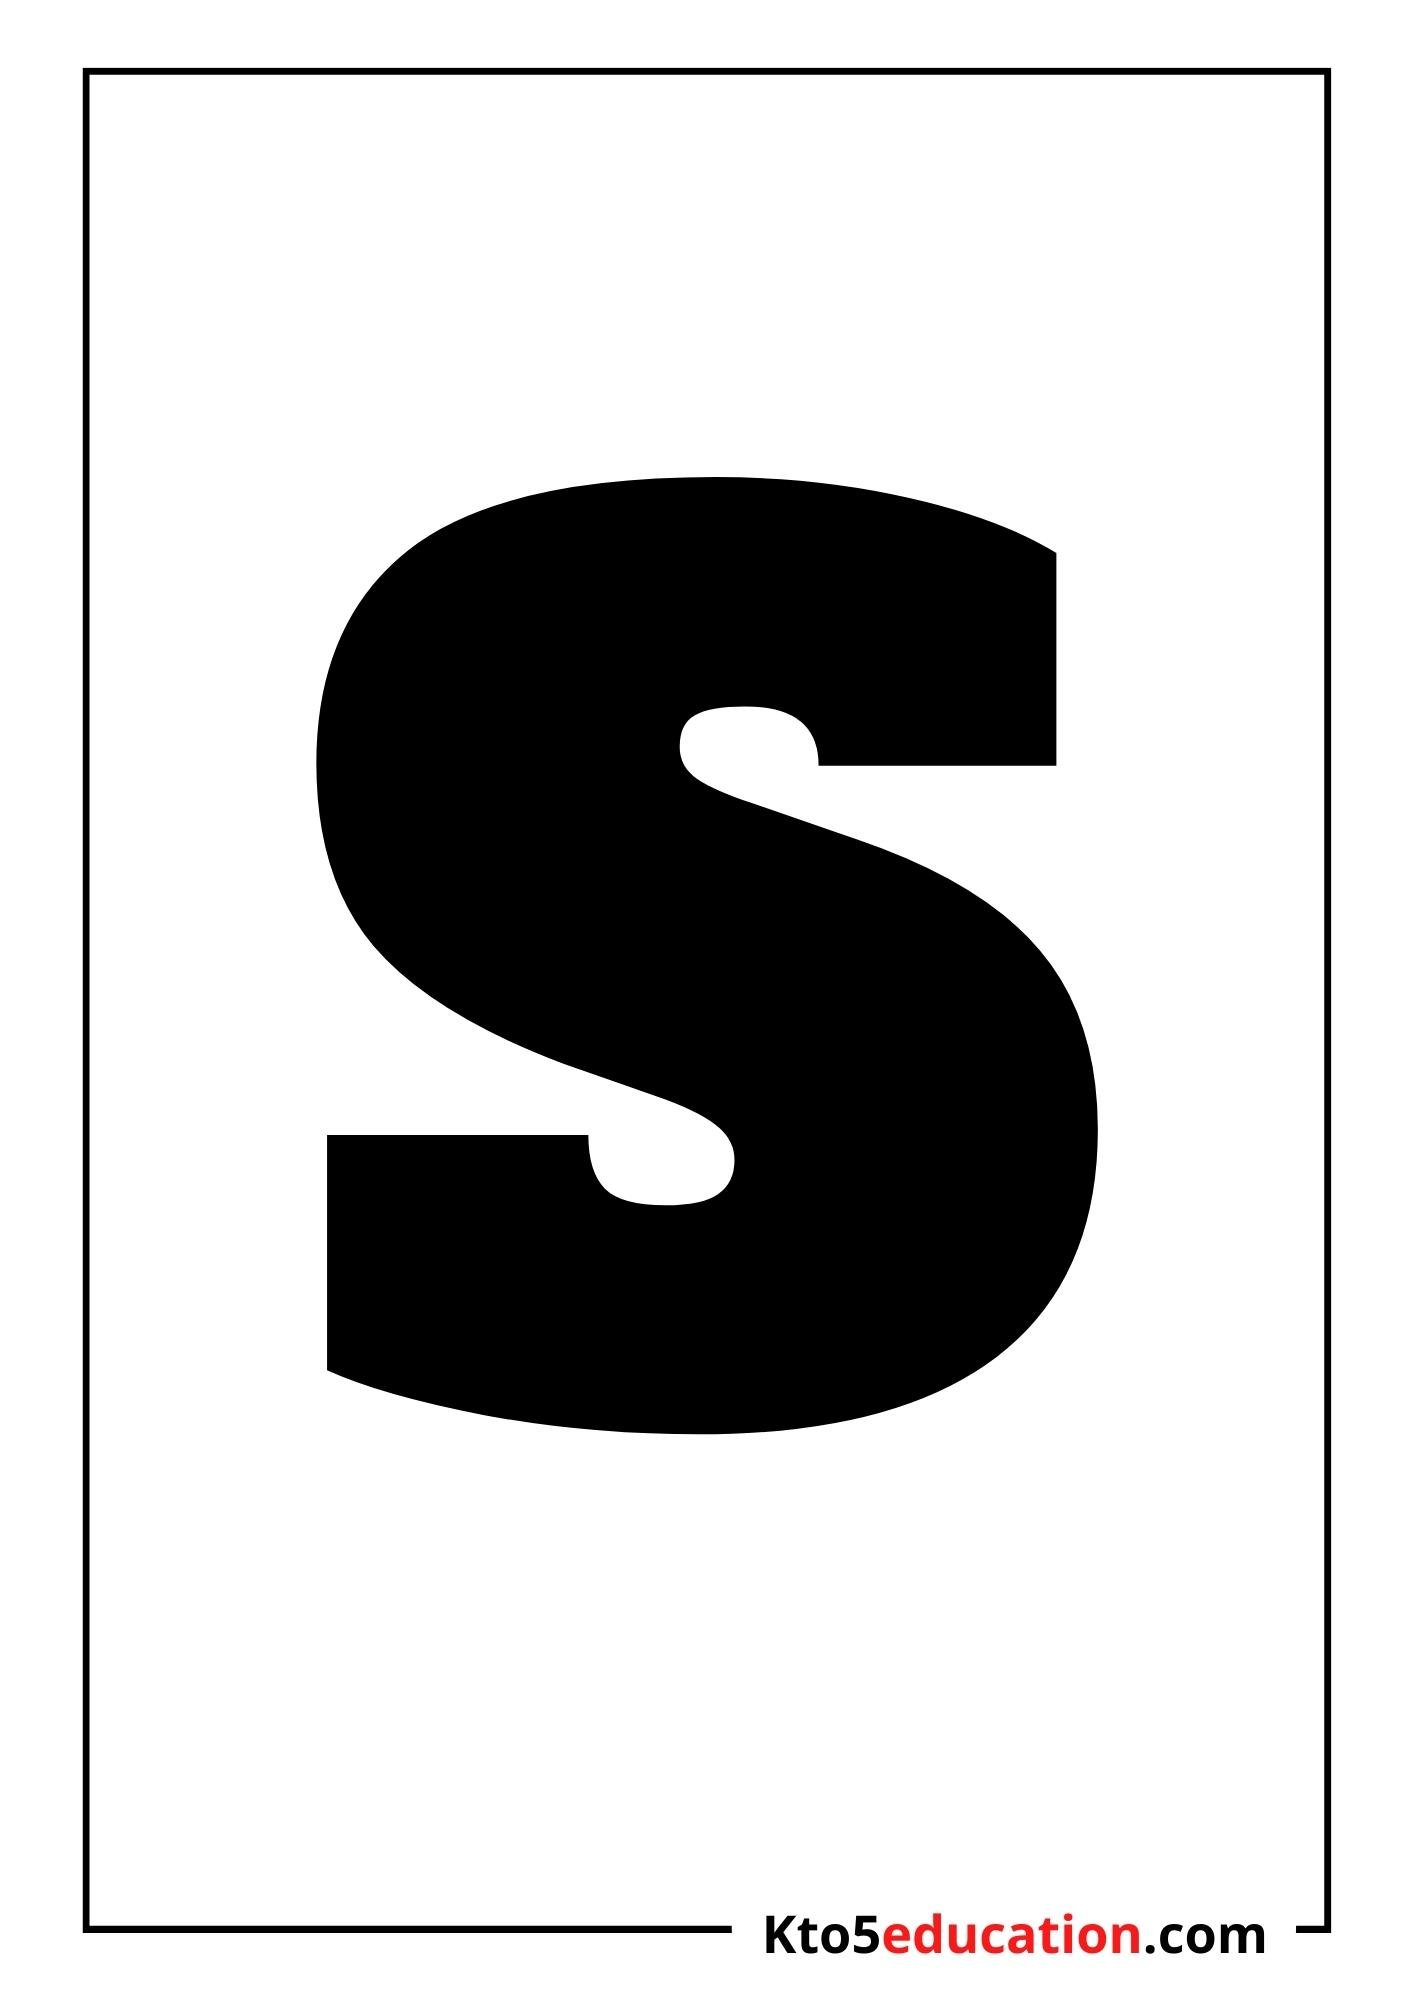 Free Printable Letter S Silhouette